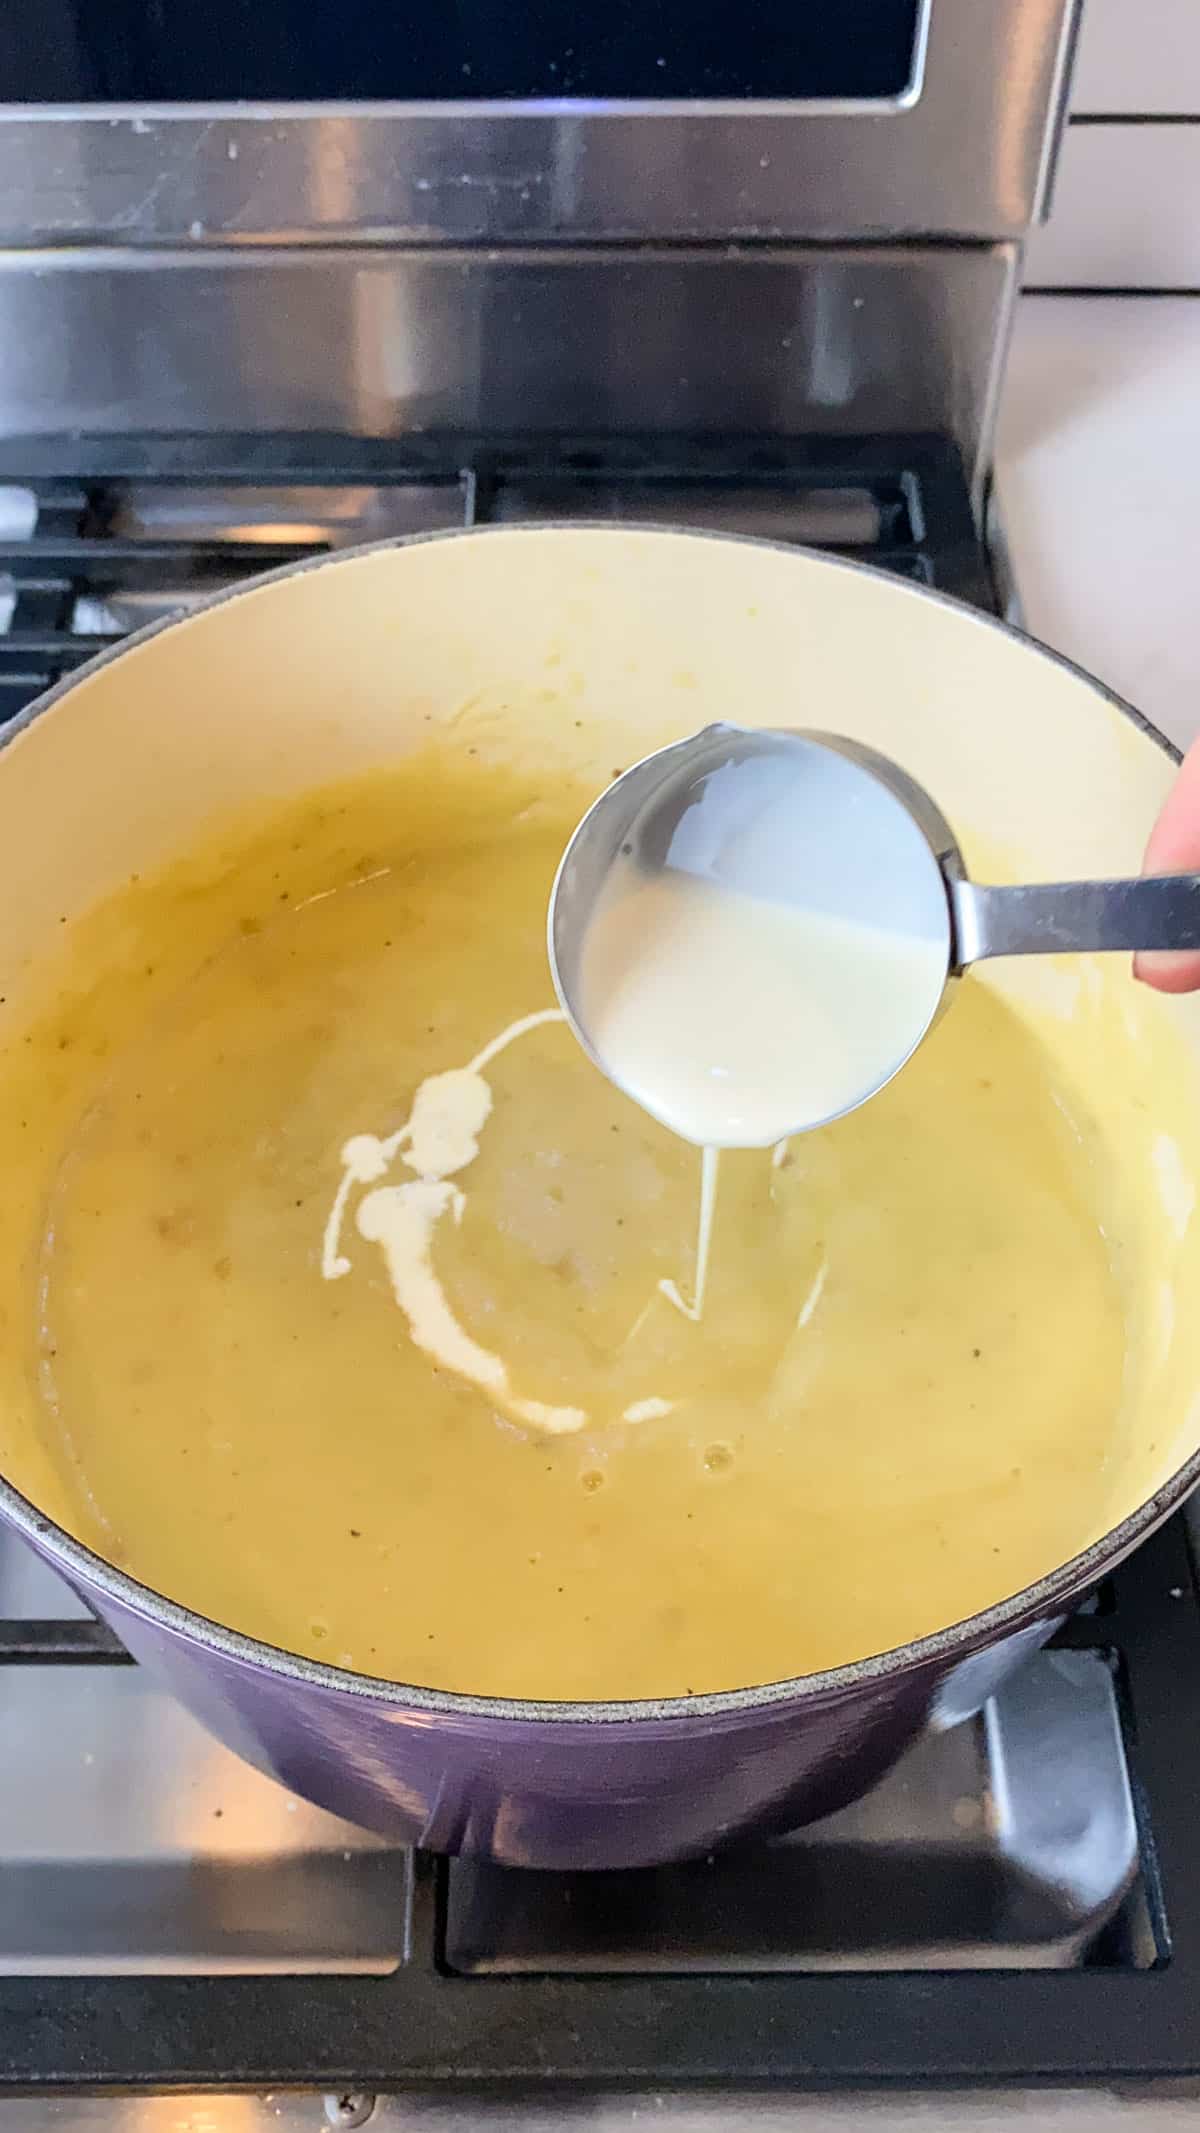 Once the potato leek soup is blended and smooth, stir in heavy cream.